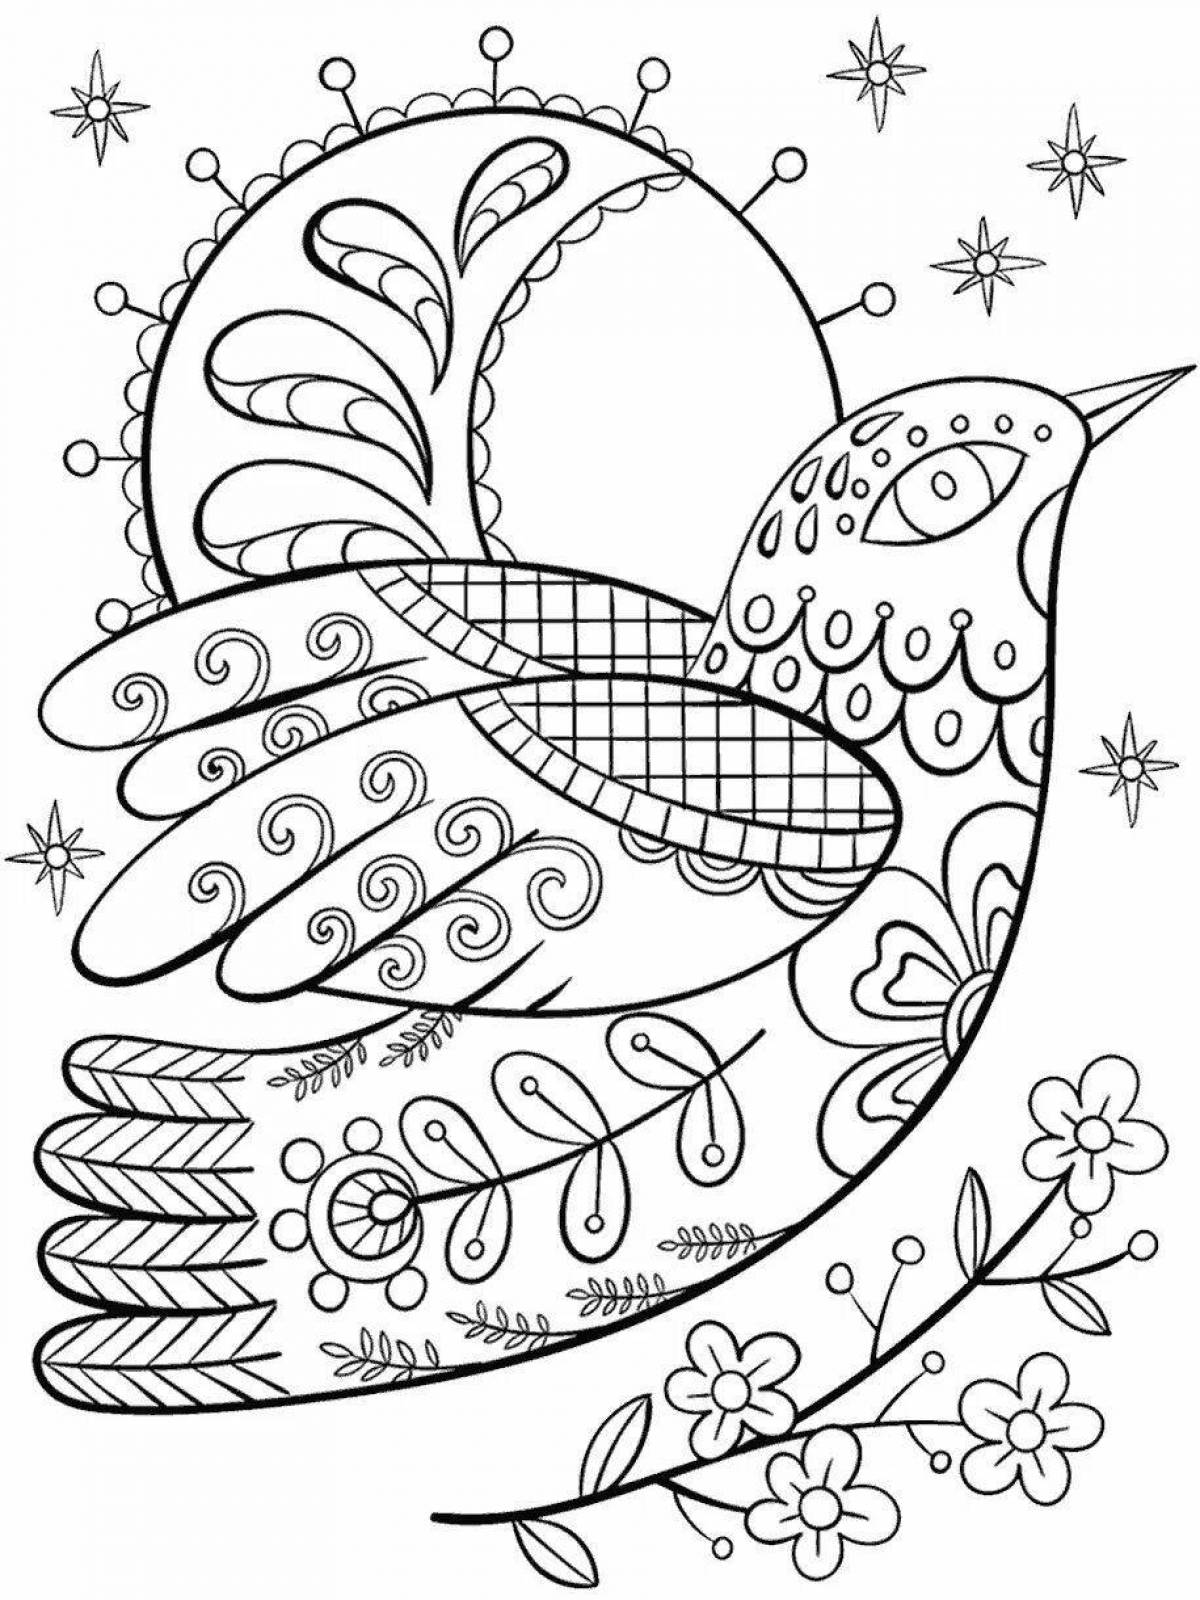 Amazing winter patterns coloring for kids